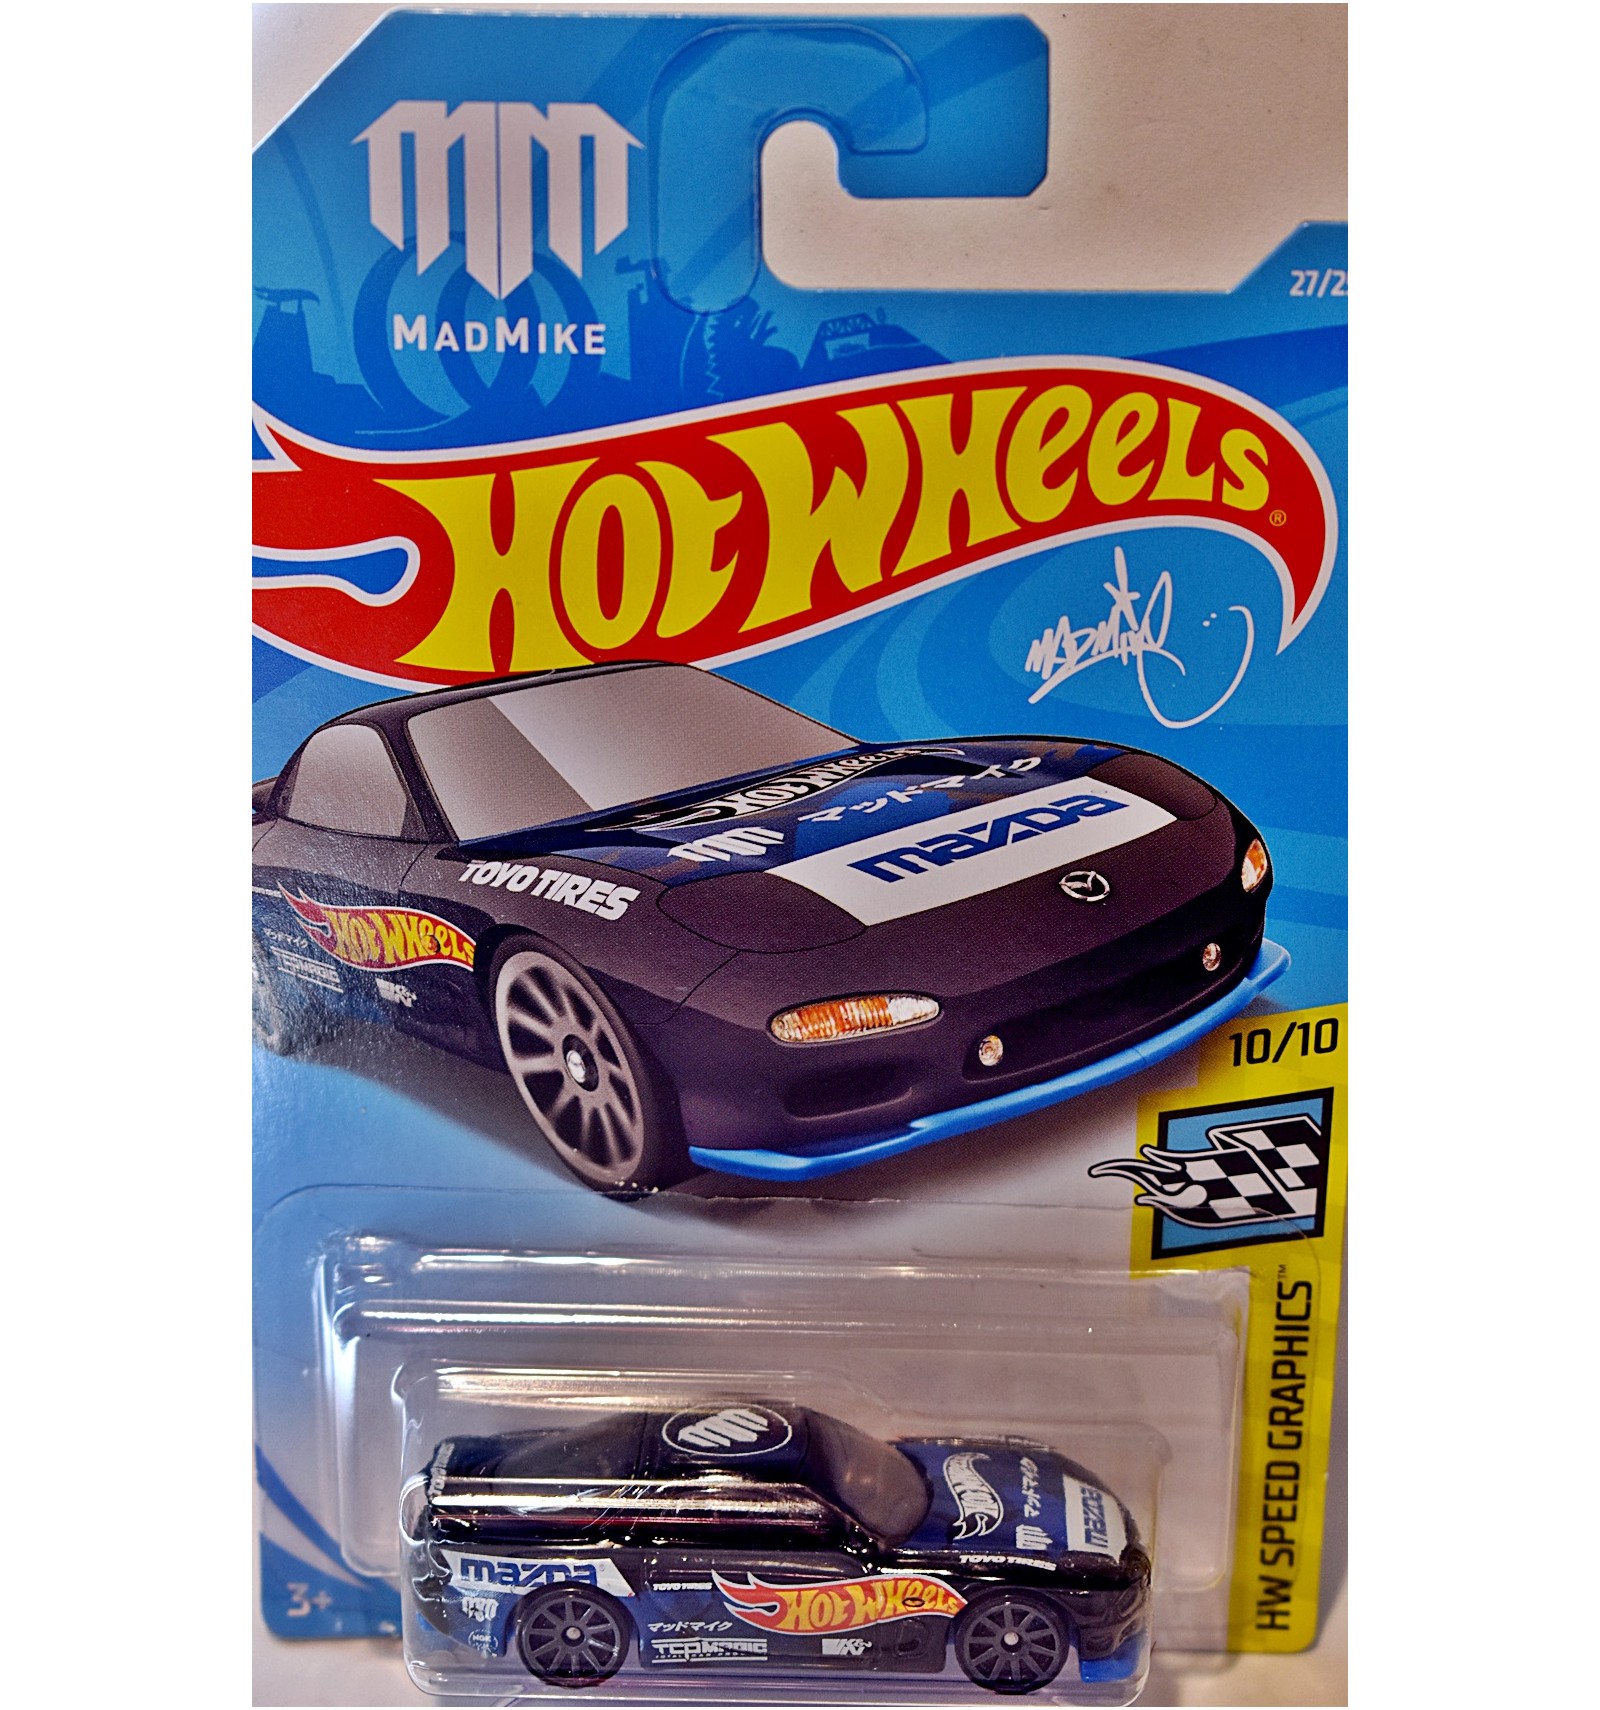 2019 HOT WHEELS '95 Mazda RX-7 #27/250 HW SPEED GRAPHICS 10/10 1995 MAD MIKE 